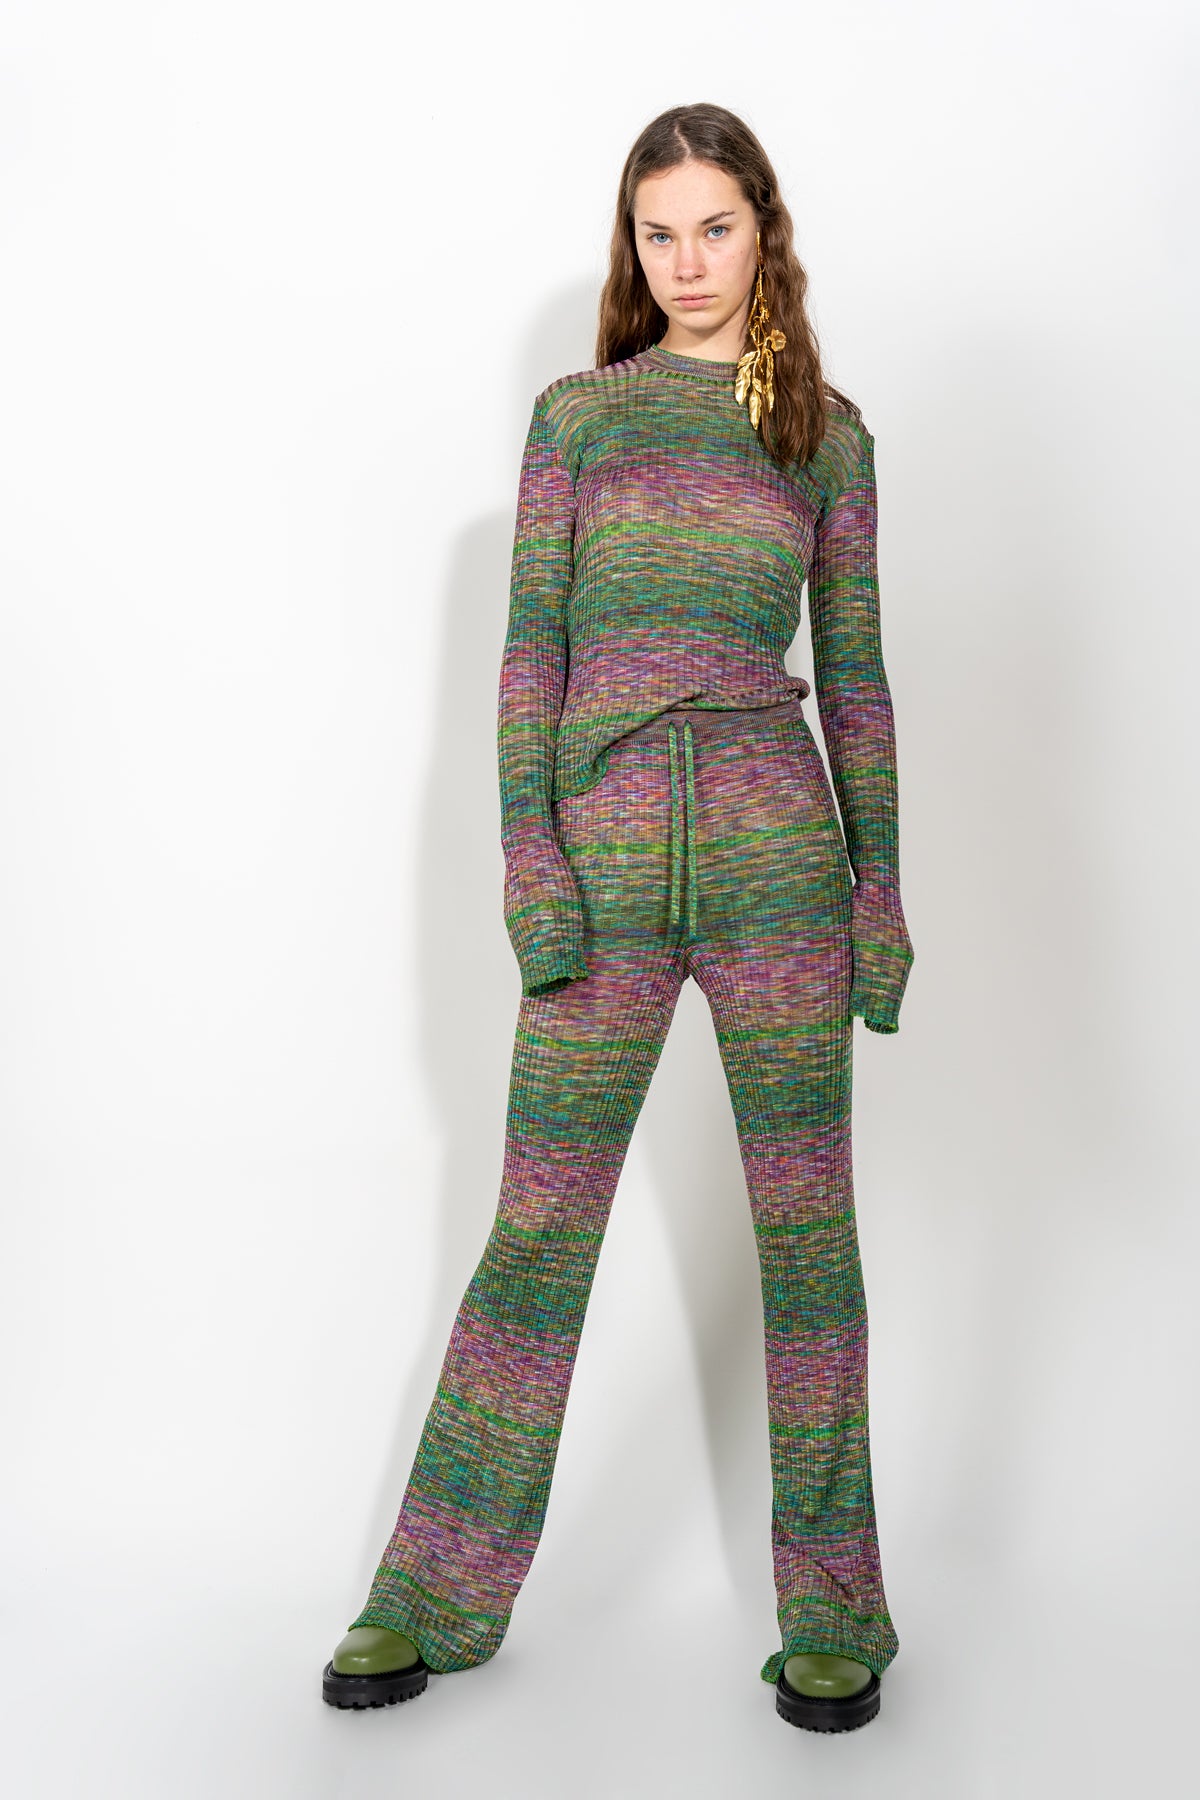 MELANGE KNITTED TROUSERS marques almeida